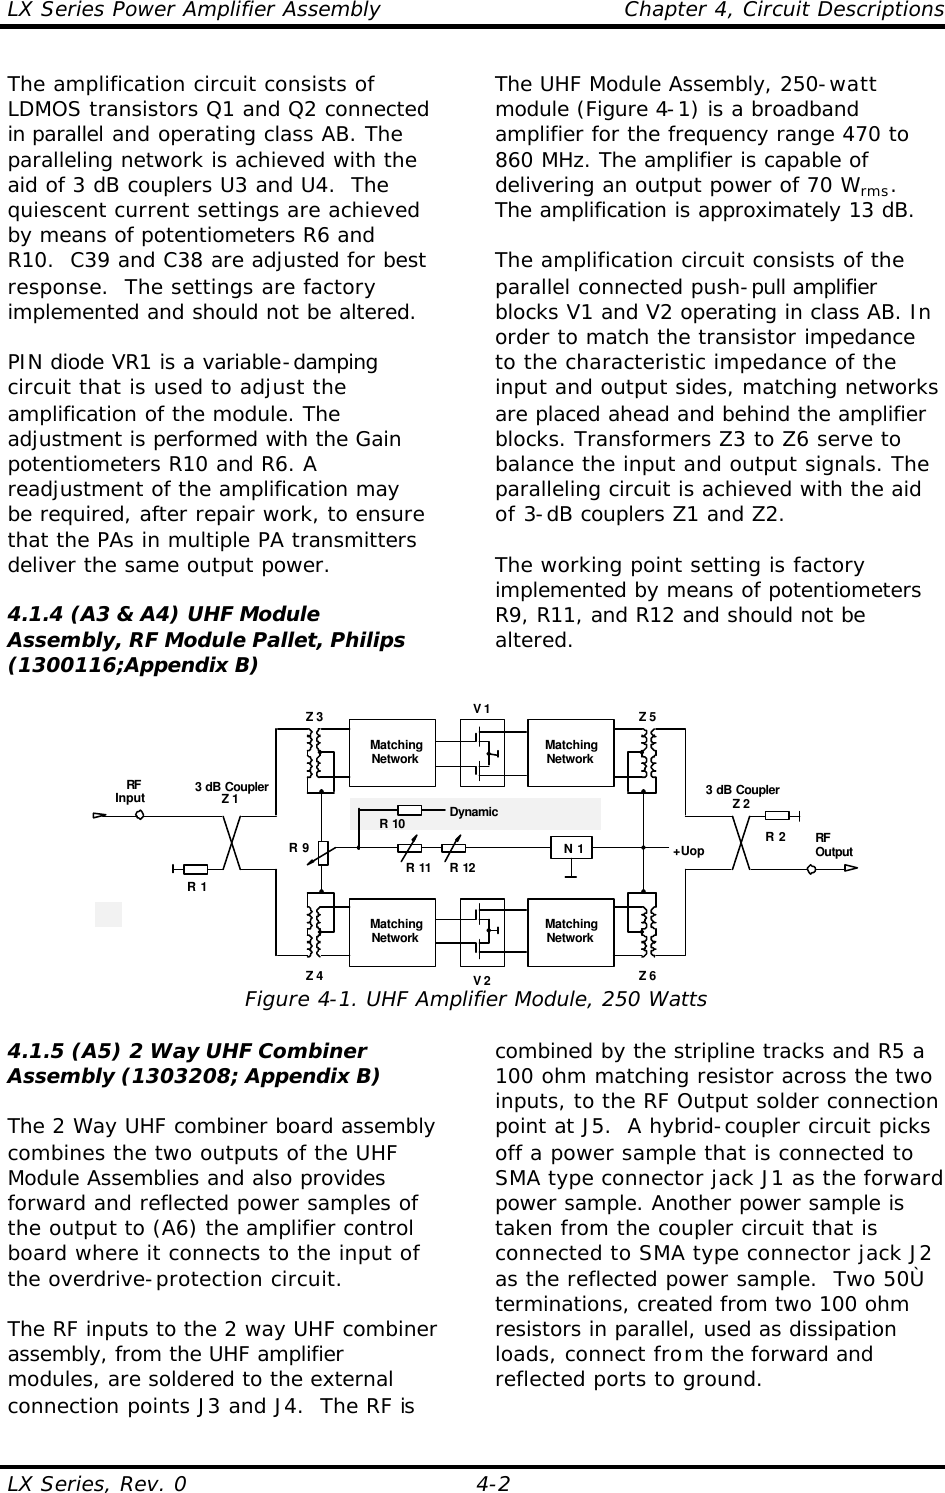 LX Series Power Amplifier Assembly    Chapter 4, Circuit Descriptions LX Series, Rev. 0    4-2 The amplification circuit consists of LDMOS transistors Q1 and Q2 connected in parallel and operating class AB. The paralleling network is achieved with the aid of 3 dB couplers U3 and U4.  The quiescent current settings are achieved by means of potentiometers R6 and R10.  C39 and C38 are adjusted for best response.  The settings are factory implemented and should not be altered.  PIN diode VR1 is a variable-damping circuit that is used to adjust the amplification of the module. The adjustment is performed with the Gain potentiometers R10 and R6. A readjustment of the amplification may be required, after repair work, to ensure that the PAs in multiple PA transmitters deliver the same output power.  4.1.4 (A3 &amp; A4) UHF Module Assembly, RF Module Pallet, Philips (1300116;Appendix B)  The UHF Module Assembly, 250-watt module (Figure 4-1) is a broadband amplifier for the frequency range 470 to 860 MHz. The amplifier is capable of delivering an output power of 70 Wrms. The amplification is approximately 13 dB.  The amplification circuit consists of the parallel connected push-pull amplifier blocks V1 and V2 operating in class AB. In order to match the transistor impedance to the characteristic impedance of the input and output sides, matching networks are placed ahead and behind the amplifier blocks. Transformers Z3 to Z6 serve to balance the input and output signals. The paralleling circuit is achieved with the aid of 3-dB couplers Z1 and Z2.  The working point setting is factory implemented by means of potentiometers R9, R11, and R12 and should not be altered.  V 13 dB CouplerZ 2RFOutputRFInput 3 dB CouplerZ 1R 2R 1MatchingNetworkMatchingNetworkV 2MatchingNetworkMatchingNetworkZ 3 Z 5Z 4 Z 6+UopN 1R 11 R 12R 9R 10 DynamicEqualization Figure 4-1. UHF Amplifier Module, 250 Watts 4.1.5 (A5) 2 Way UHF Combiner Assembly (1303208; Appendix B)  The 2 Way UHF combiner board assembly combines the two outputs of the UHF Module Assemblies and also provides forward and reflected power samples of the output to (A6) the amplifier control board where it connects to the input of the overdrive-protection circuit.  The RF inputs to the 2 way UHF combiner assembly, from the UHF amplifier modules, are soldered to the external connection points J3 and J4.  The RF is combined by the stripline tracks and R5 a 100 ohm matching resistor across the two inputs, to the RF Output solder connection point at J5.  A hybrid-coupler circuit picks off a power sample that is connected to SMA type connector jack J1 as the forward power sample. Another power sample is taken from the coupler circuit that is connected to SMA type connector jack J2 as the reflected power sample.  Two 50Ù terminations, created from two 100 ohm resistors in parallel, used as dissipation loads, connect from the forward and reflected ports to ground.  